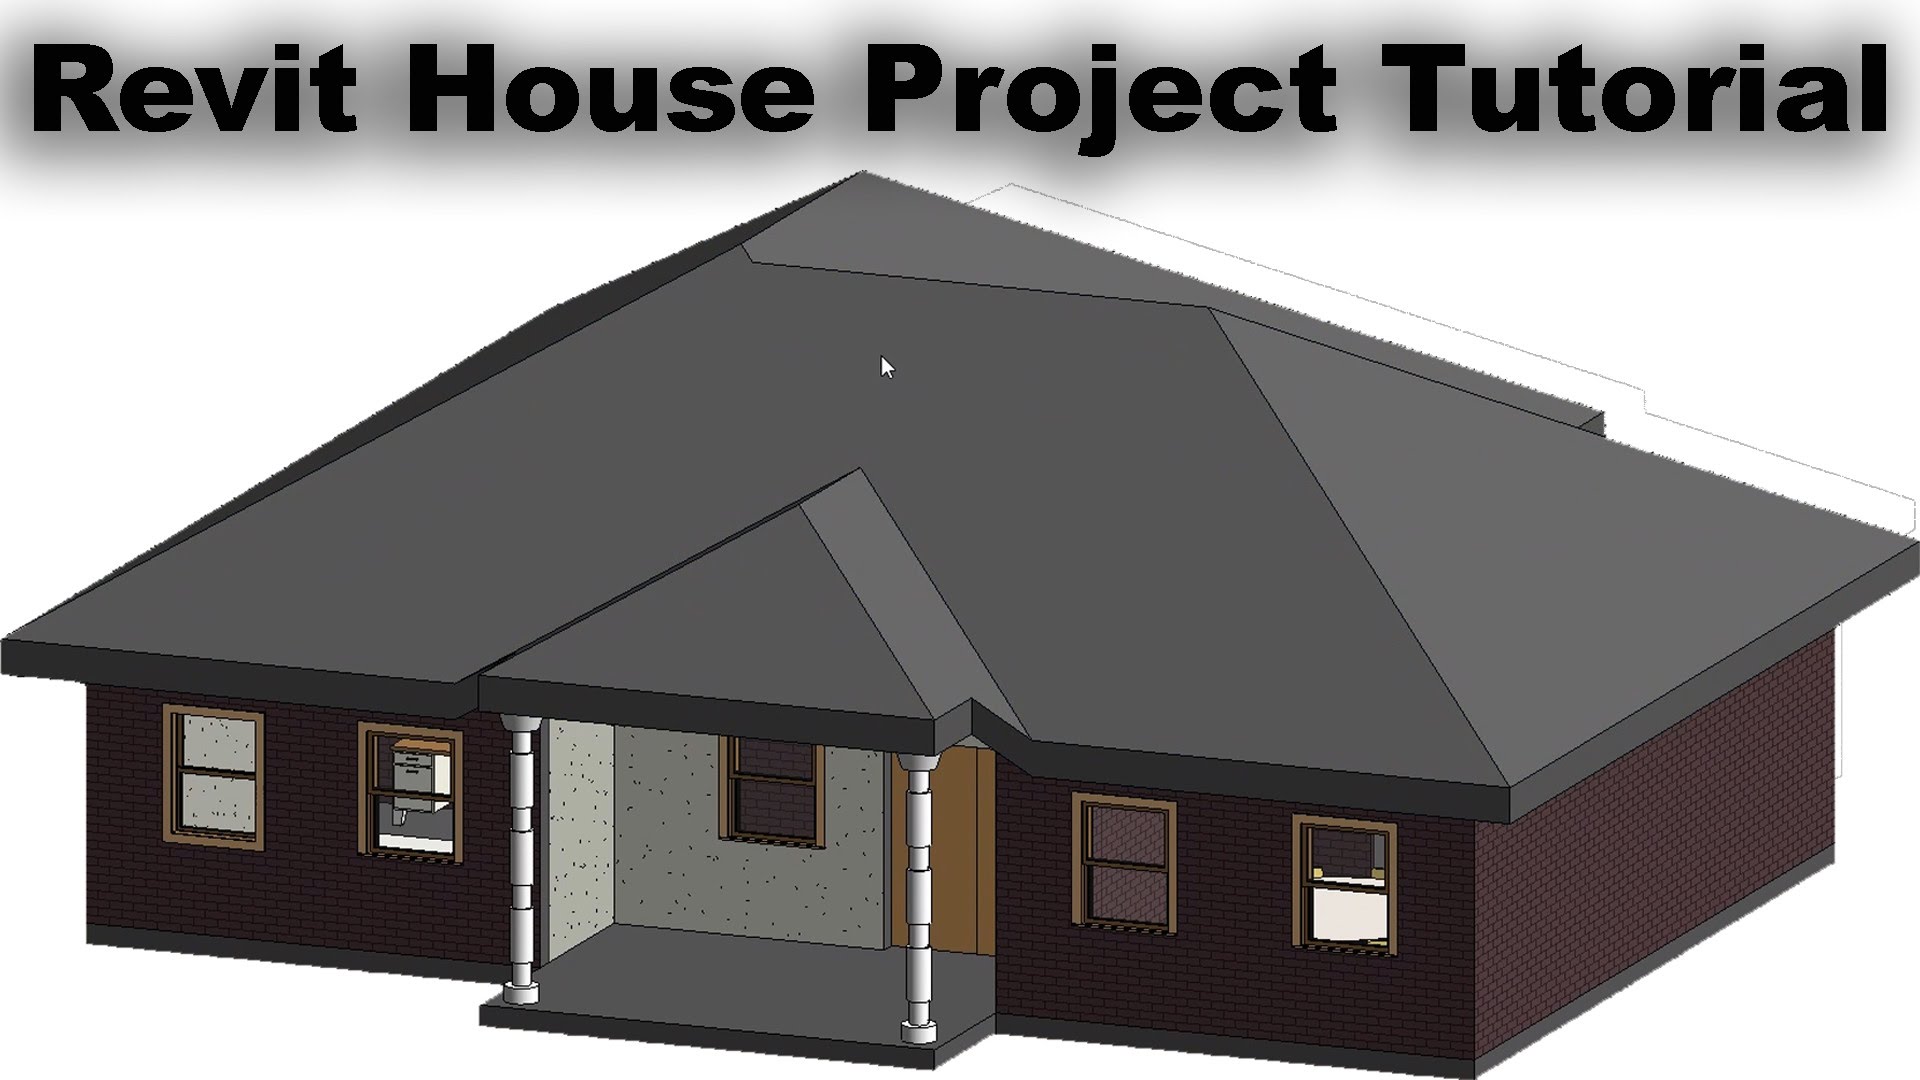  Revit  House  Project Tutorial For Beginners 2d House  Plan  